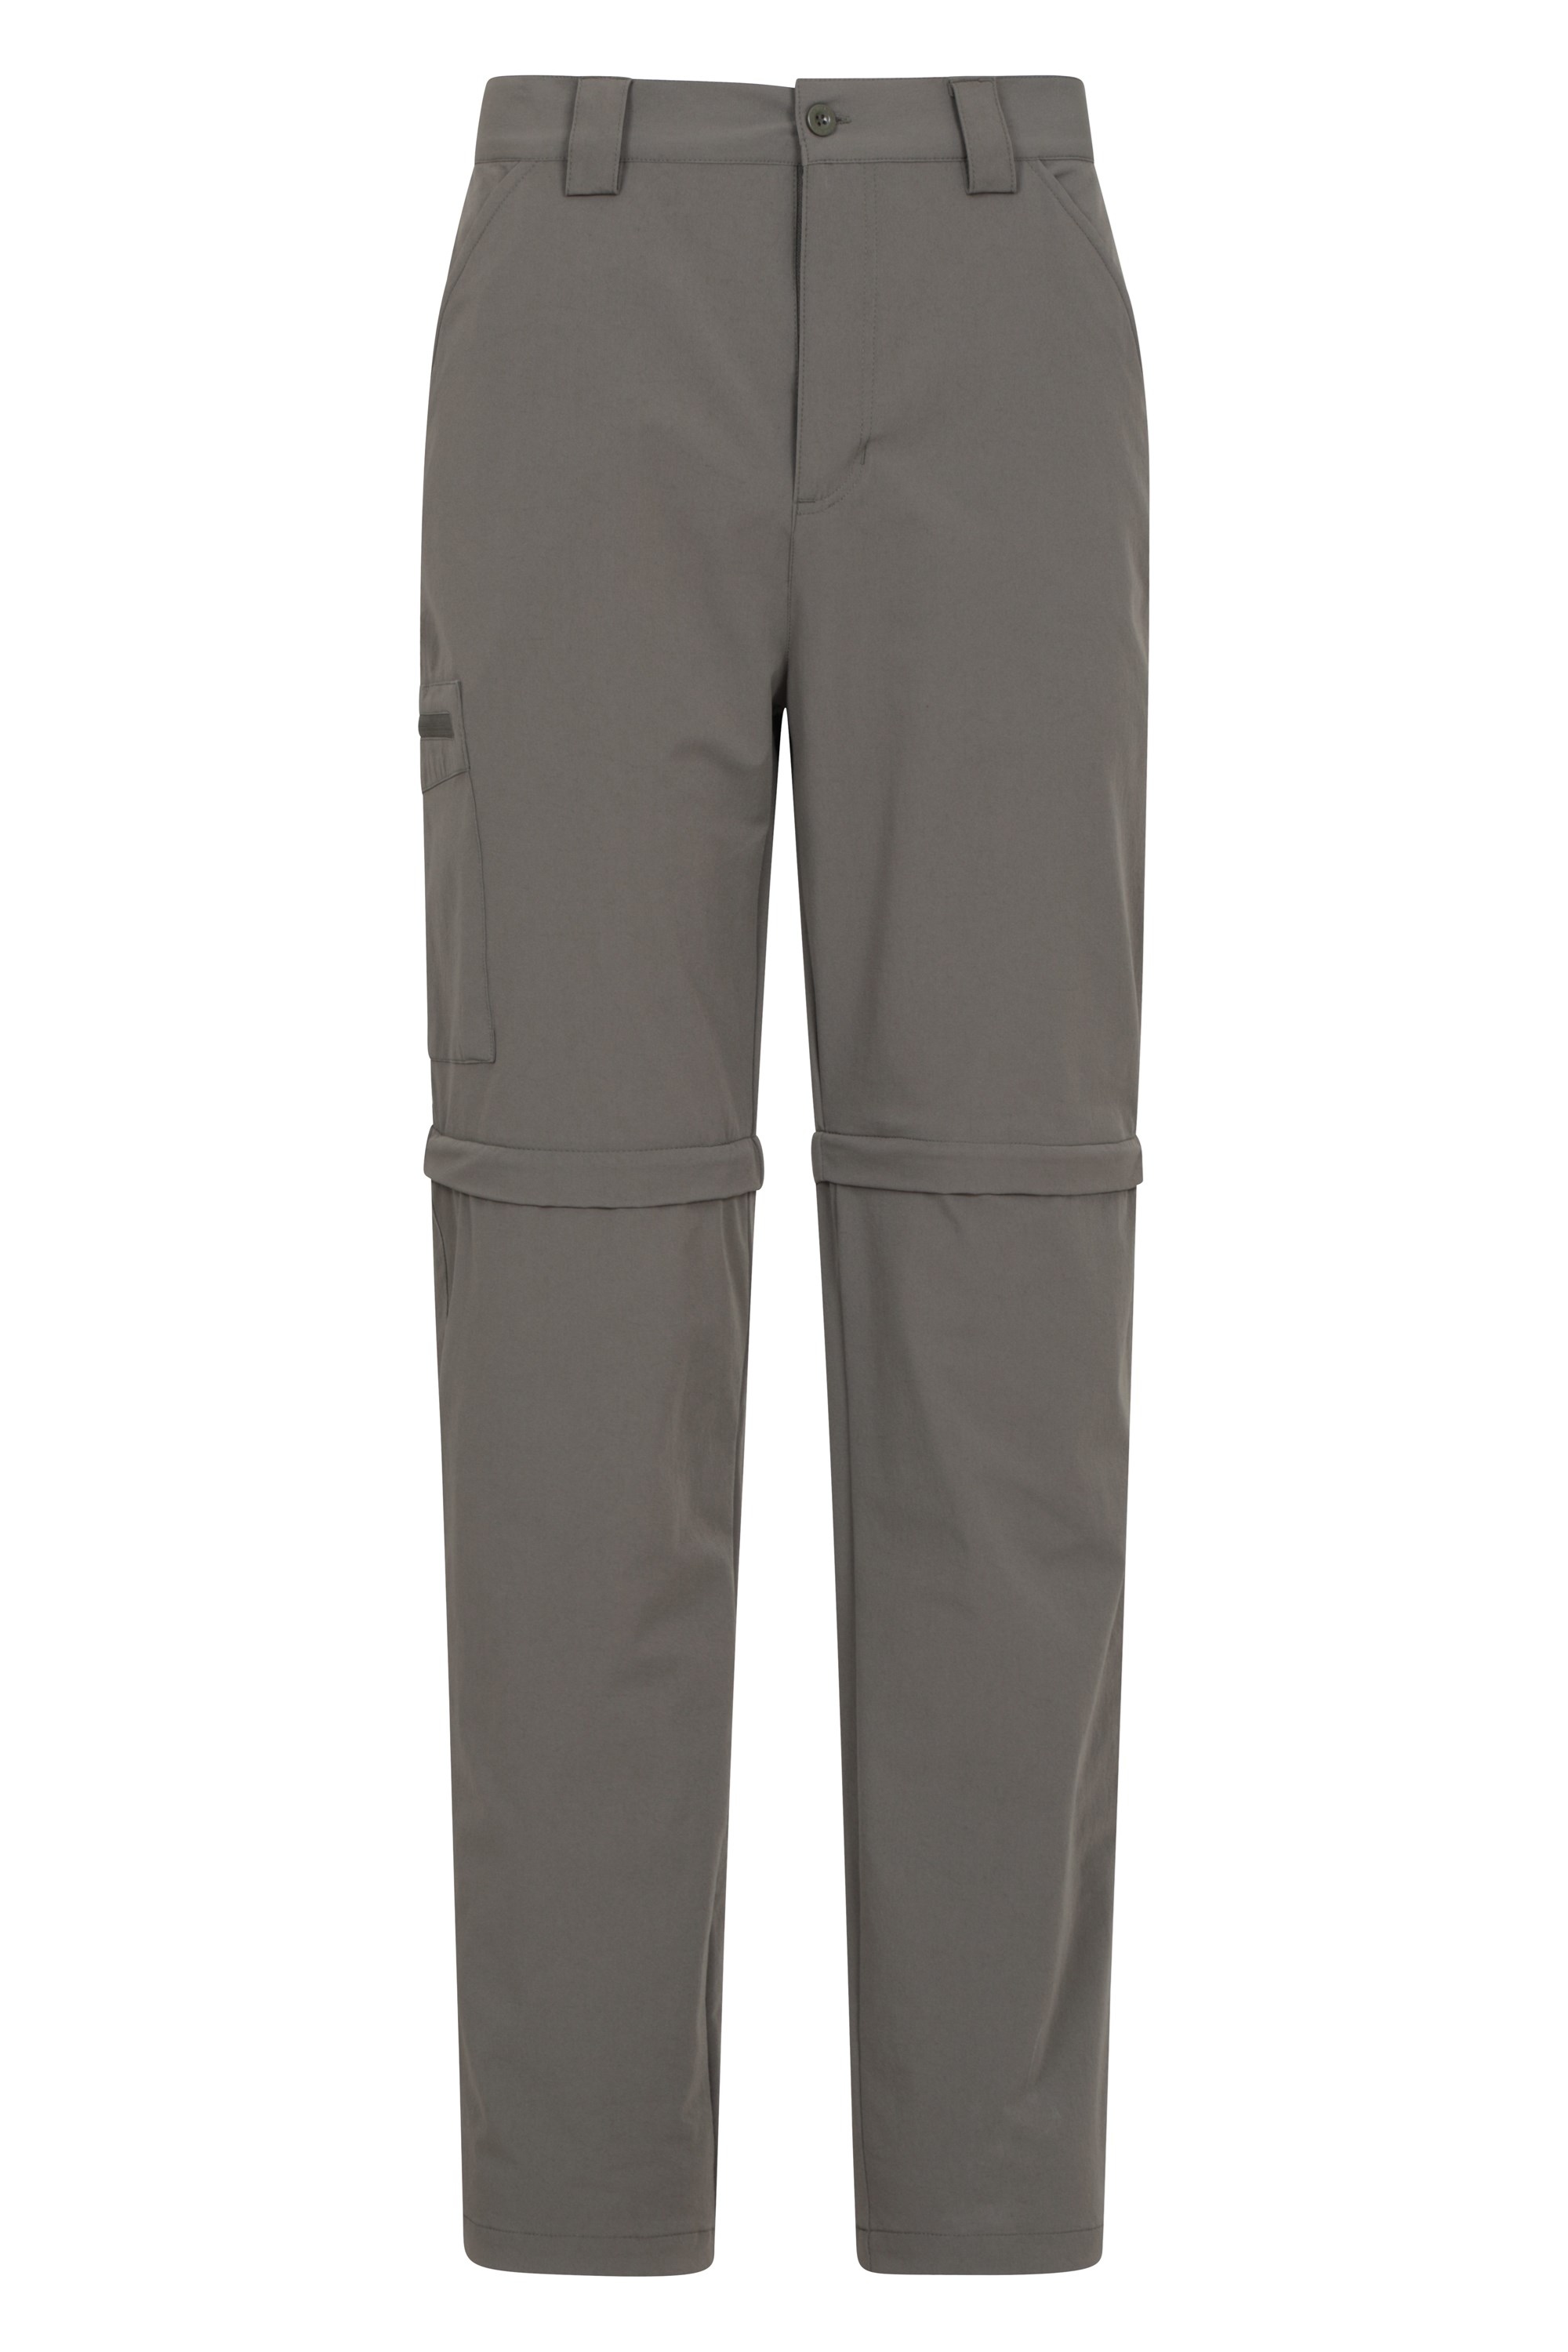 Mountain Warehouse Men Beam Stretch Trouser Technical Trousers 